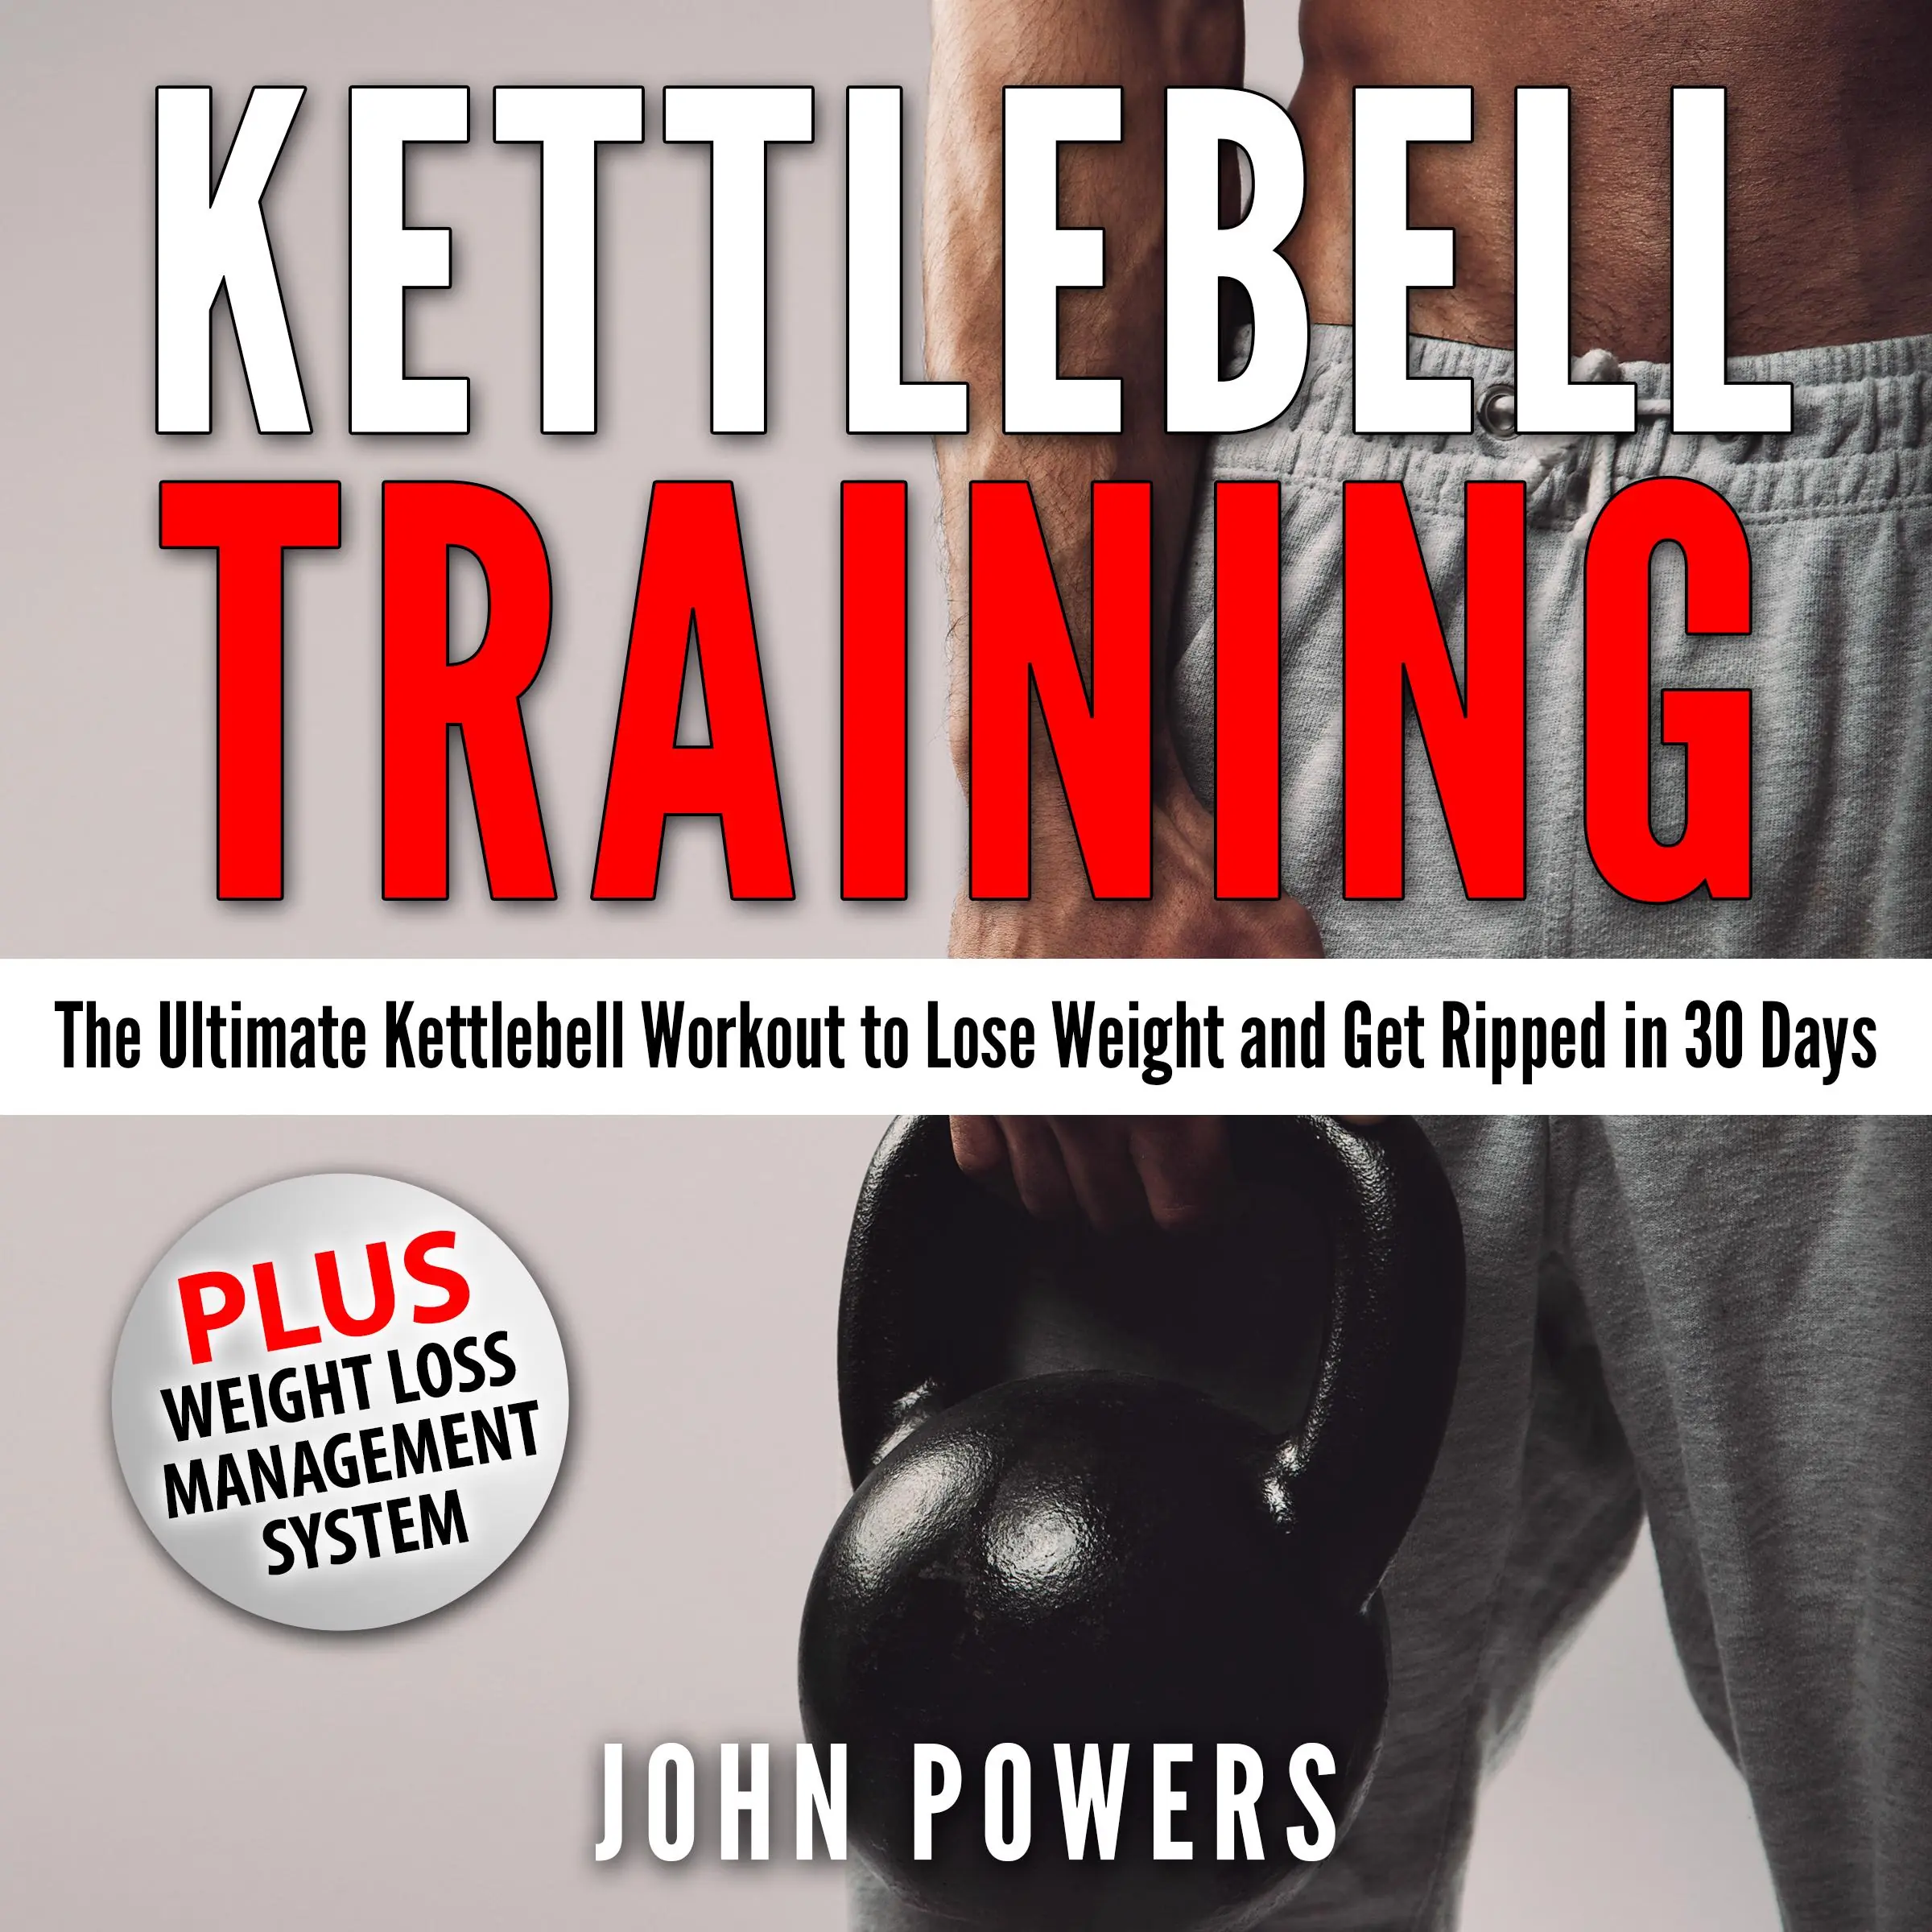 Kettlebell Training: The Ultimate Kettlebell Workout to Lose Weight and Get Ripped in 30 Days by John Powers Audiobook